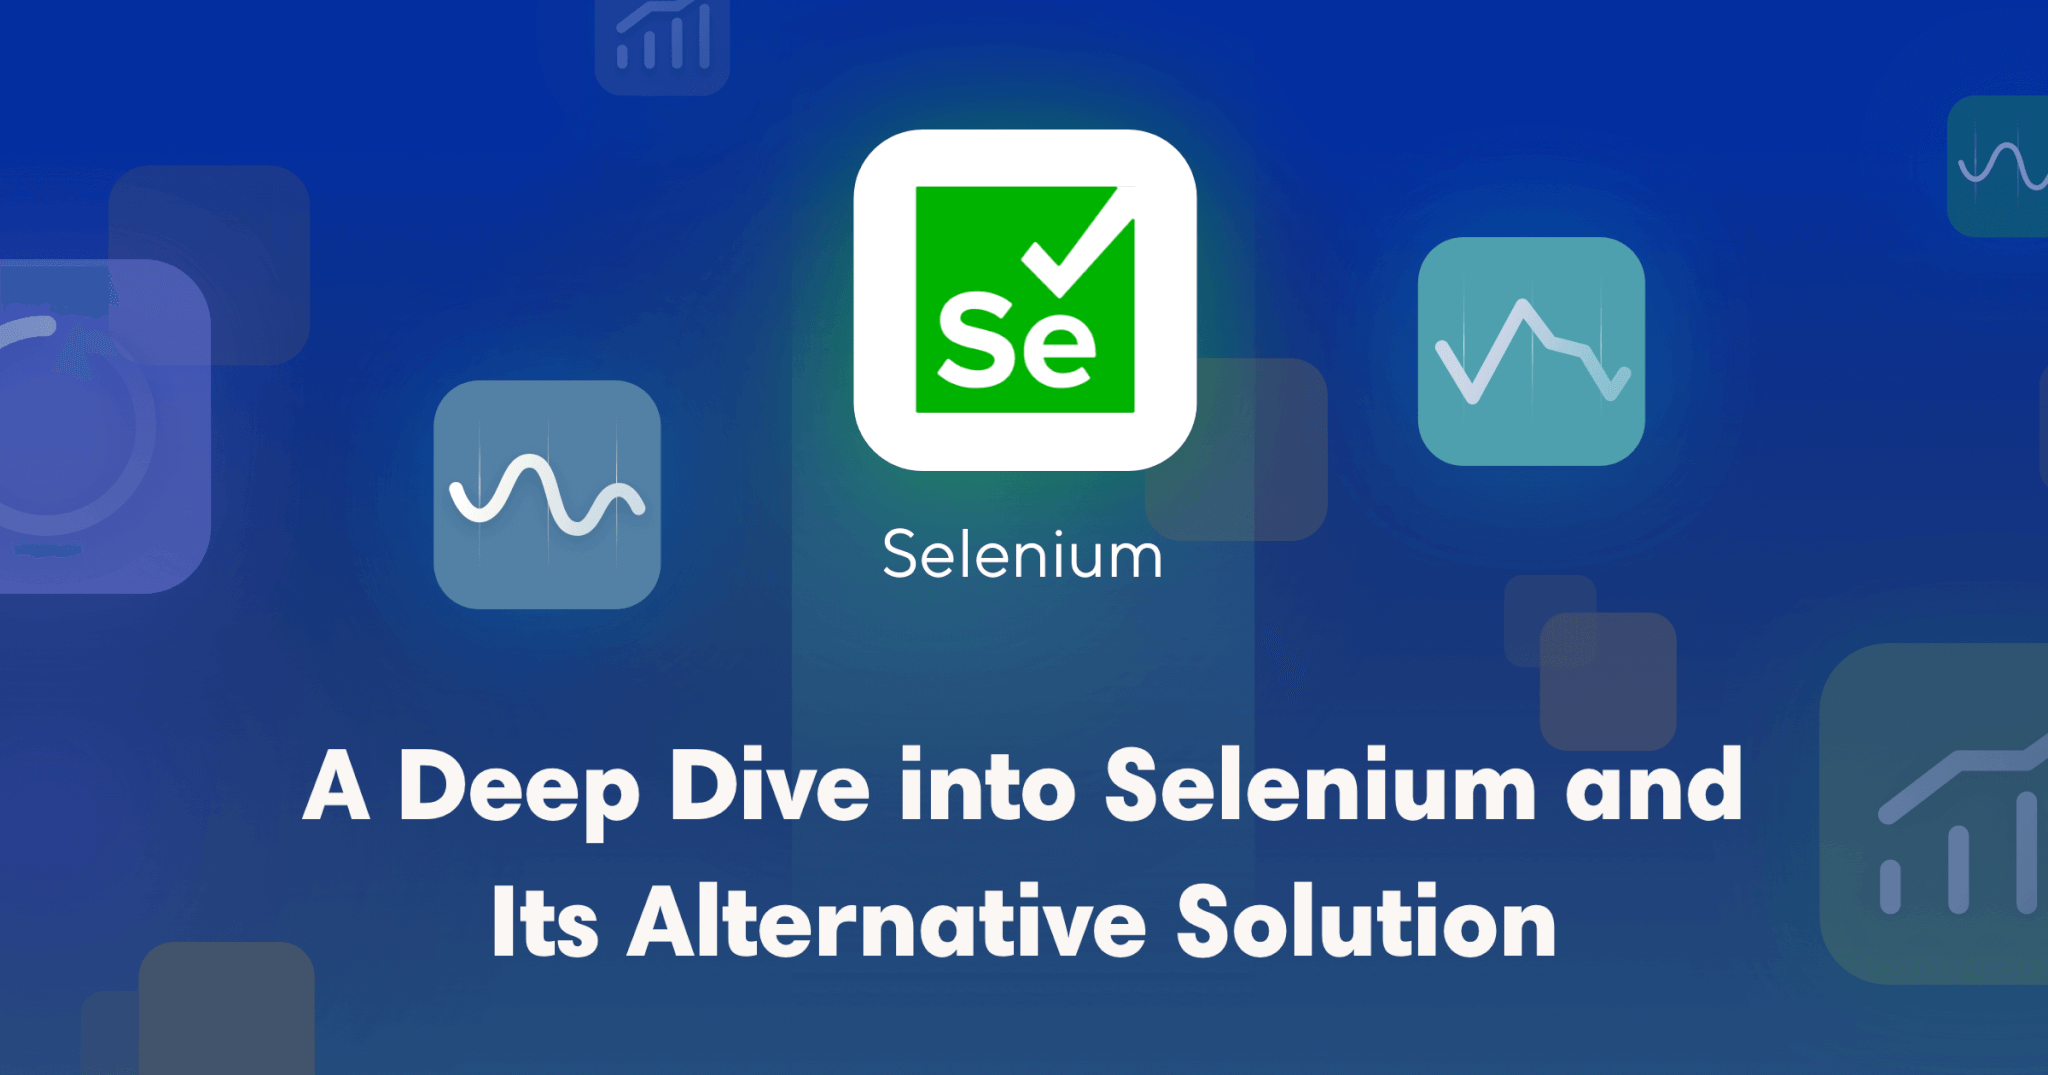 A Deep Dive into Selenium, Its Alternative Solution for 2022 and Beyond